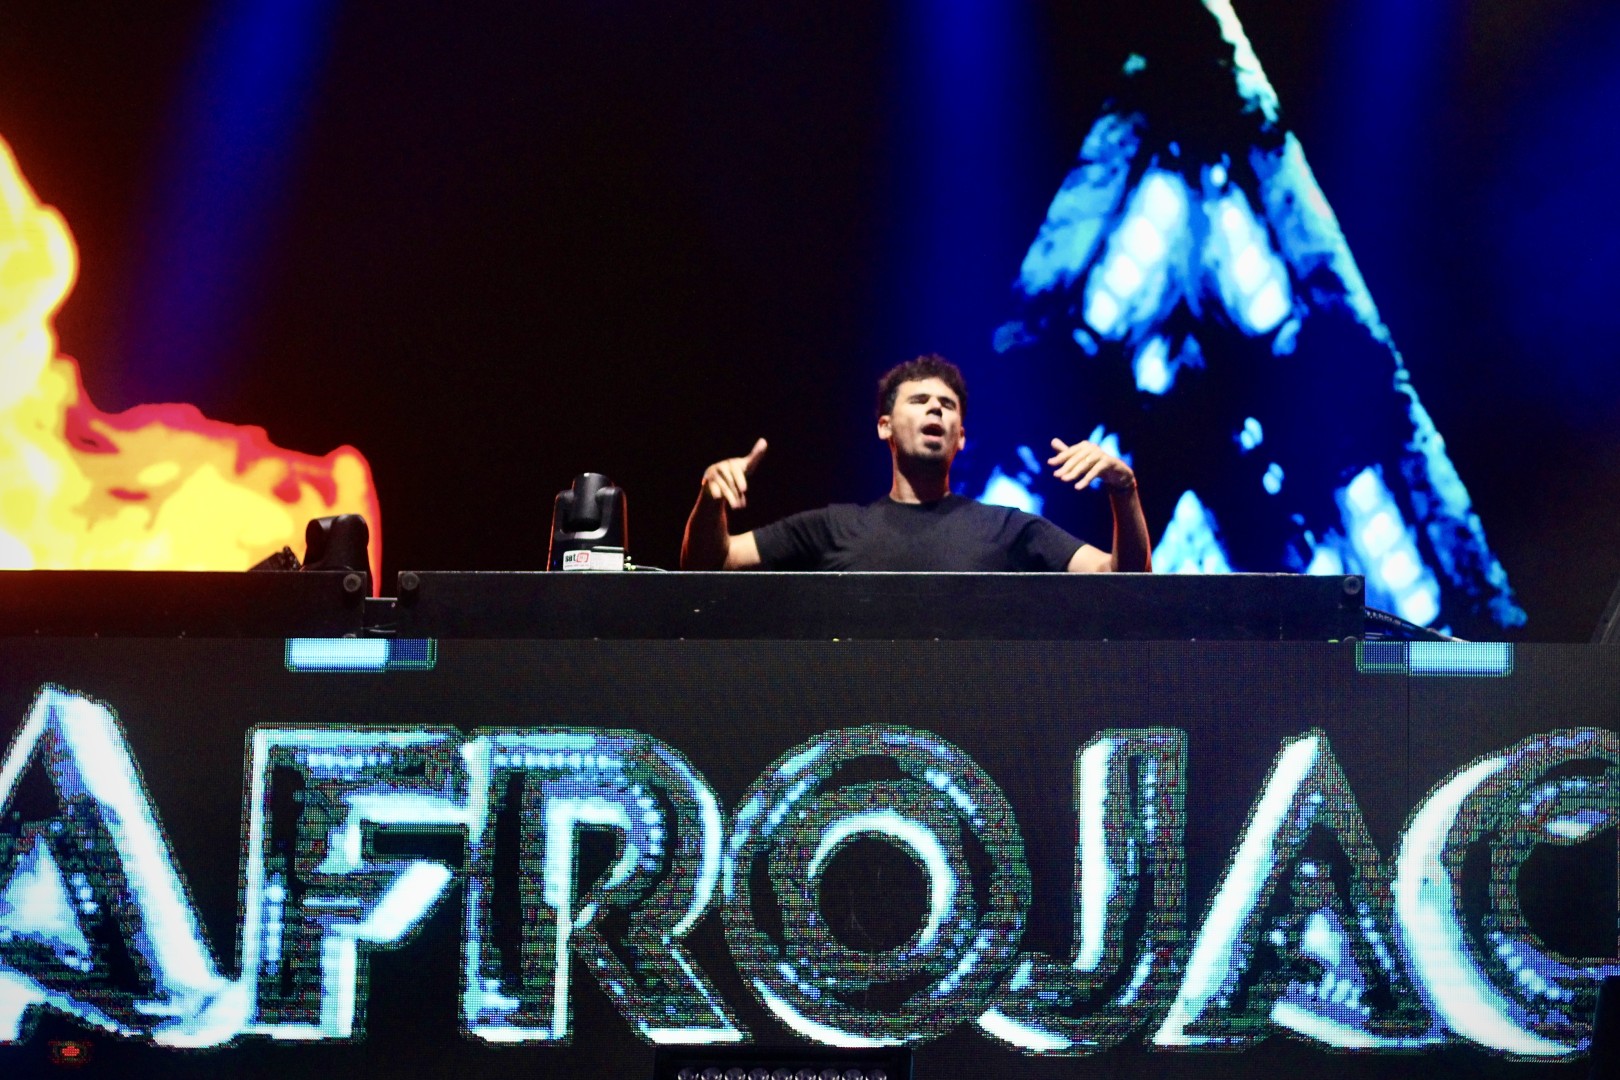 Afrojack at Arena Nationala in Bucharest on June 5, 2022 (a3d7b197a6)